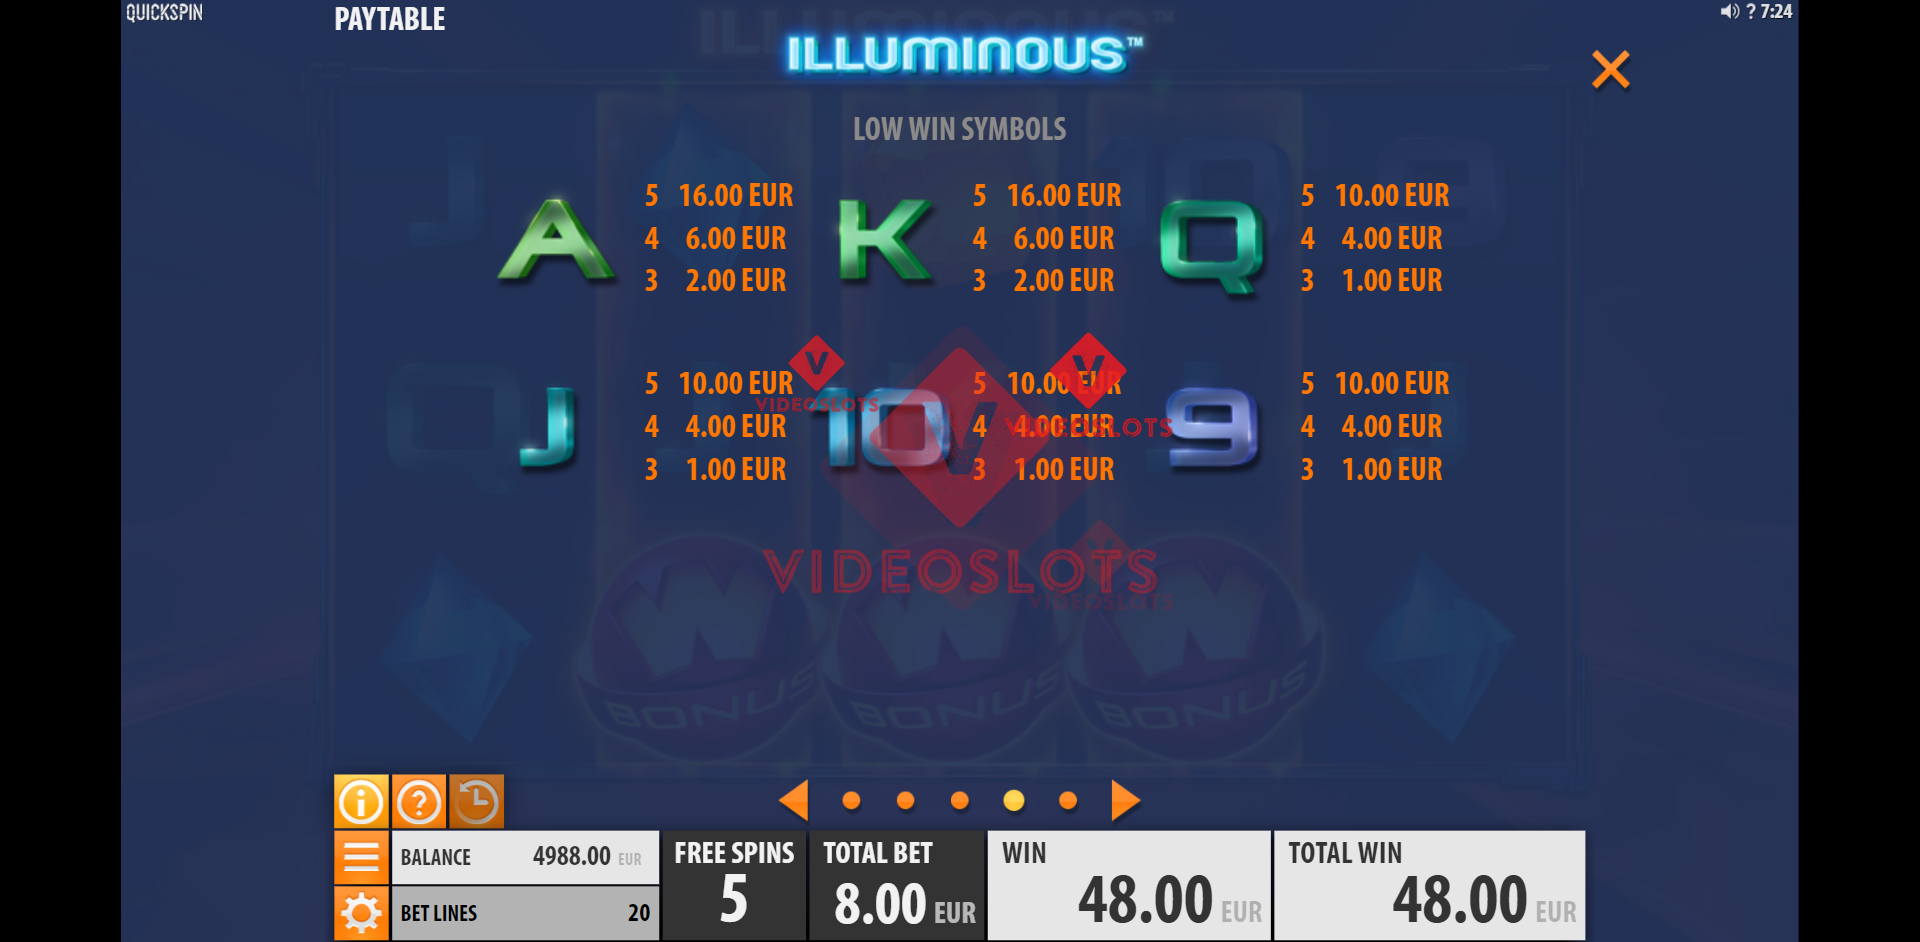 Pay Table and Game Info for Illuminous slot from Quickspin